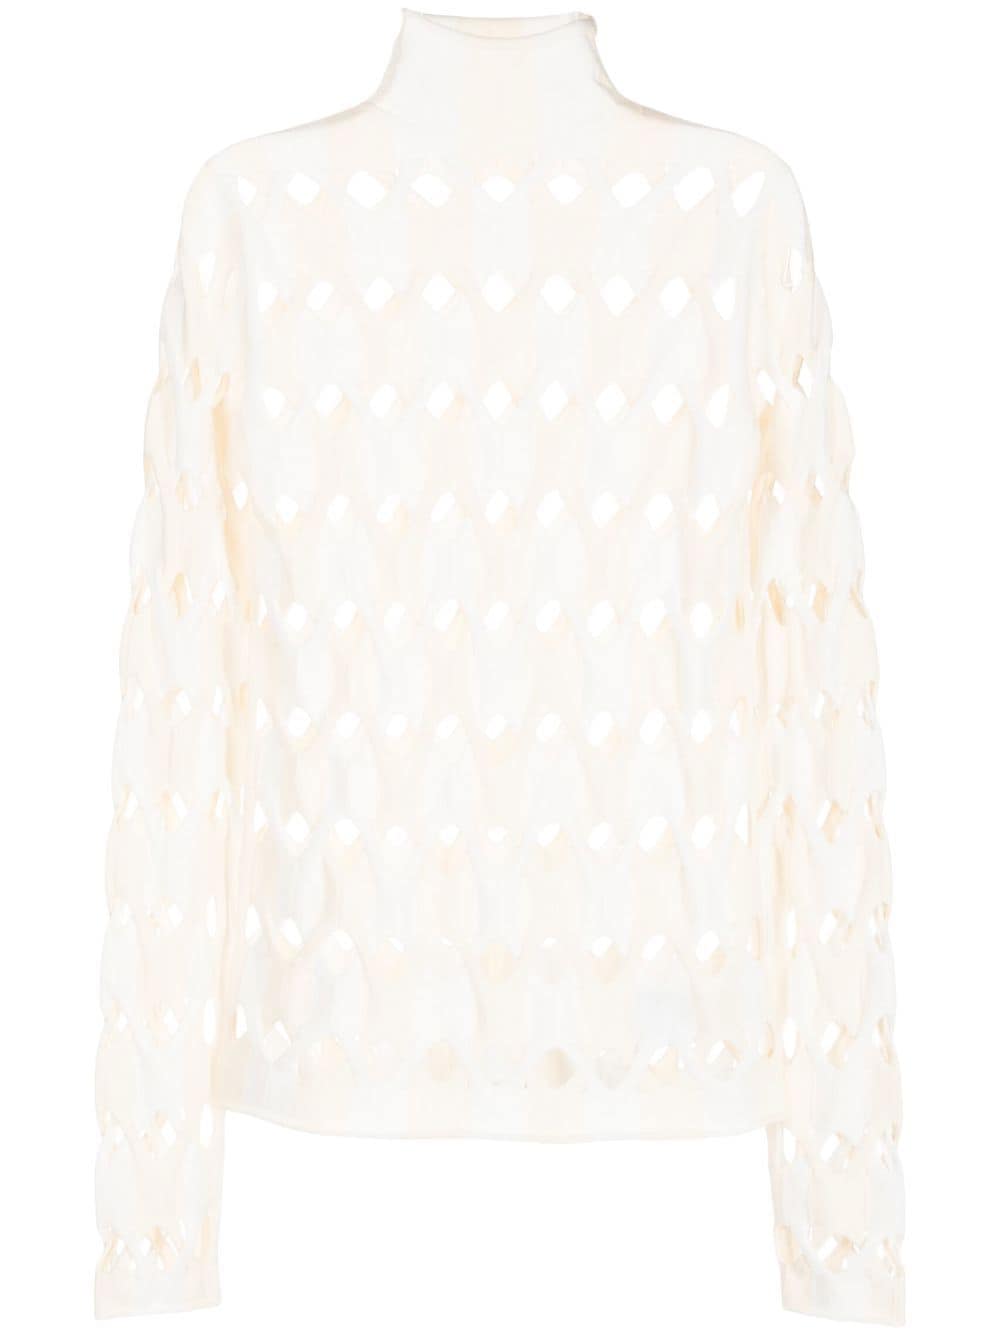 Dion Lee woven-effect long-sleeve top - White